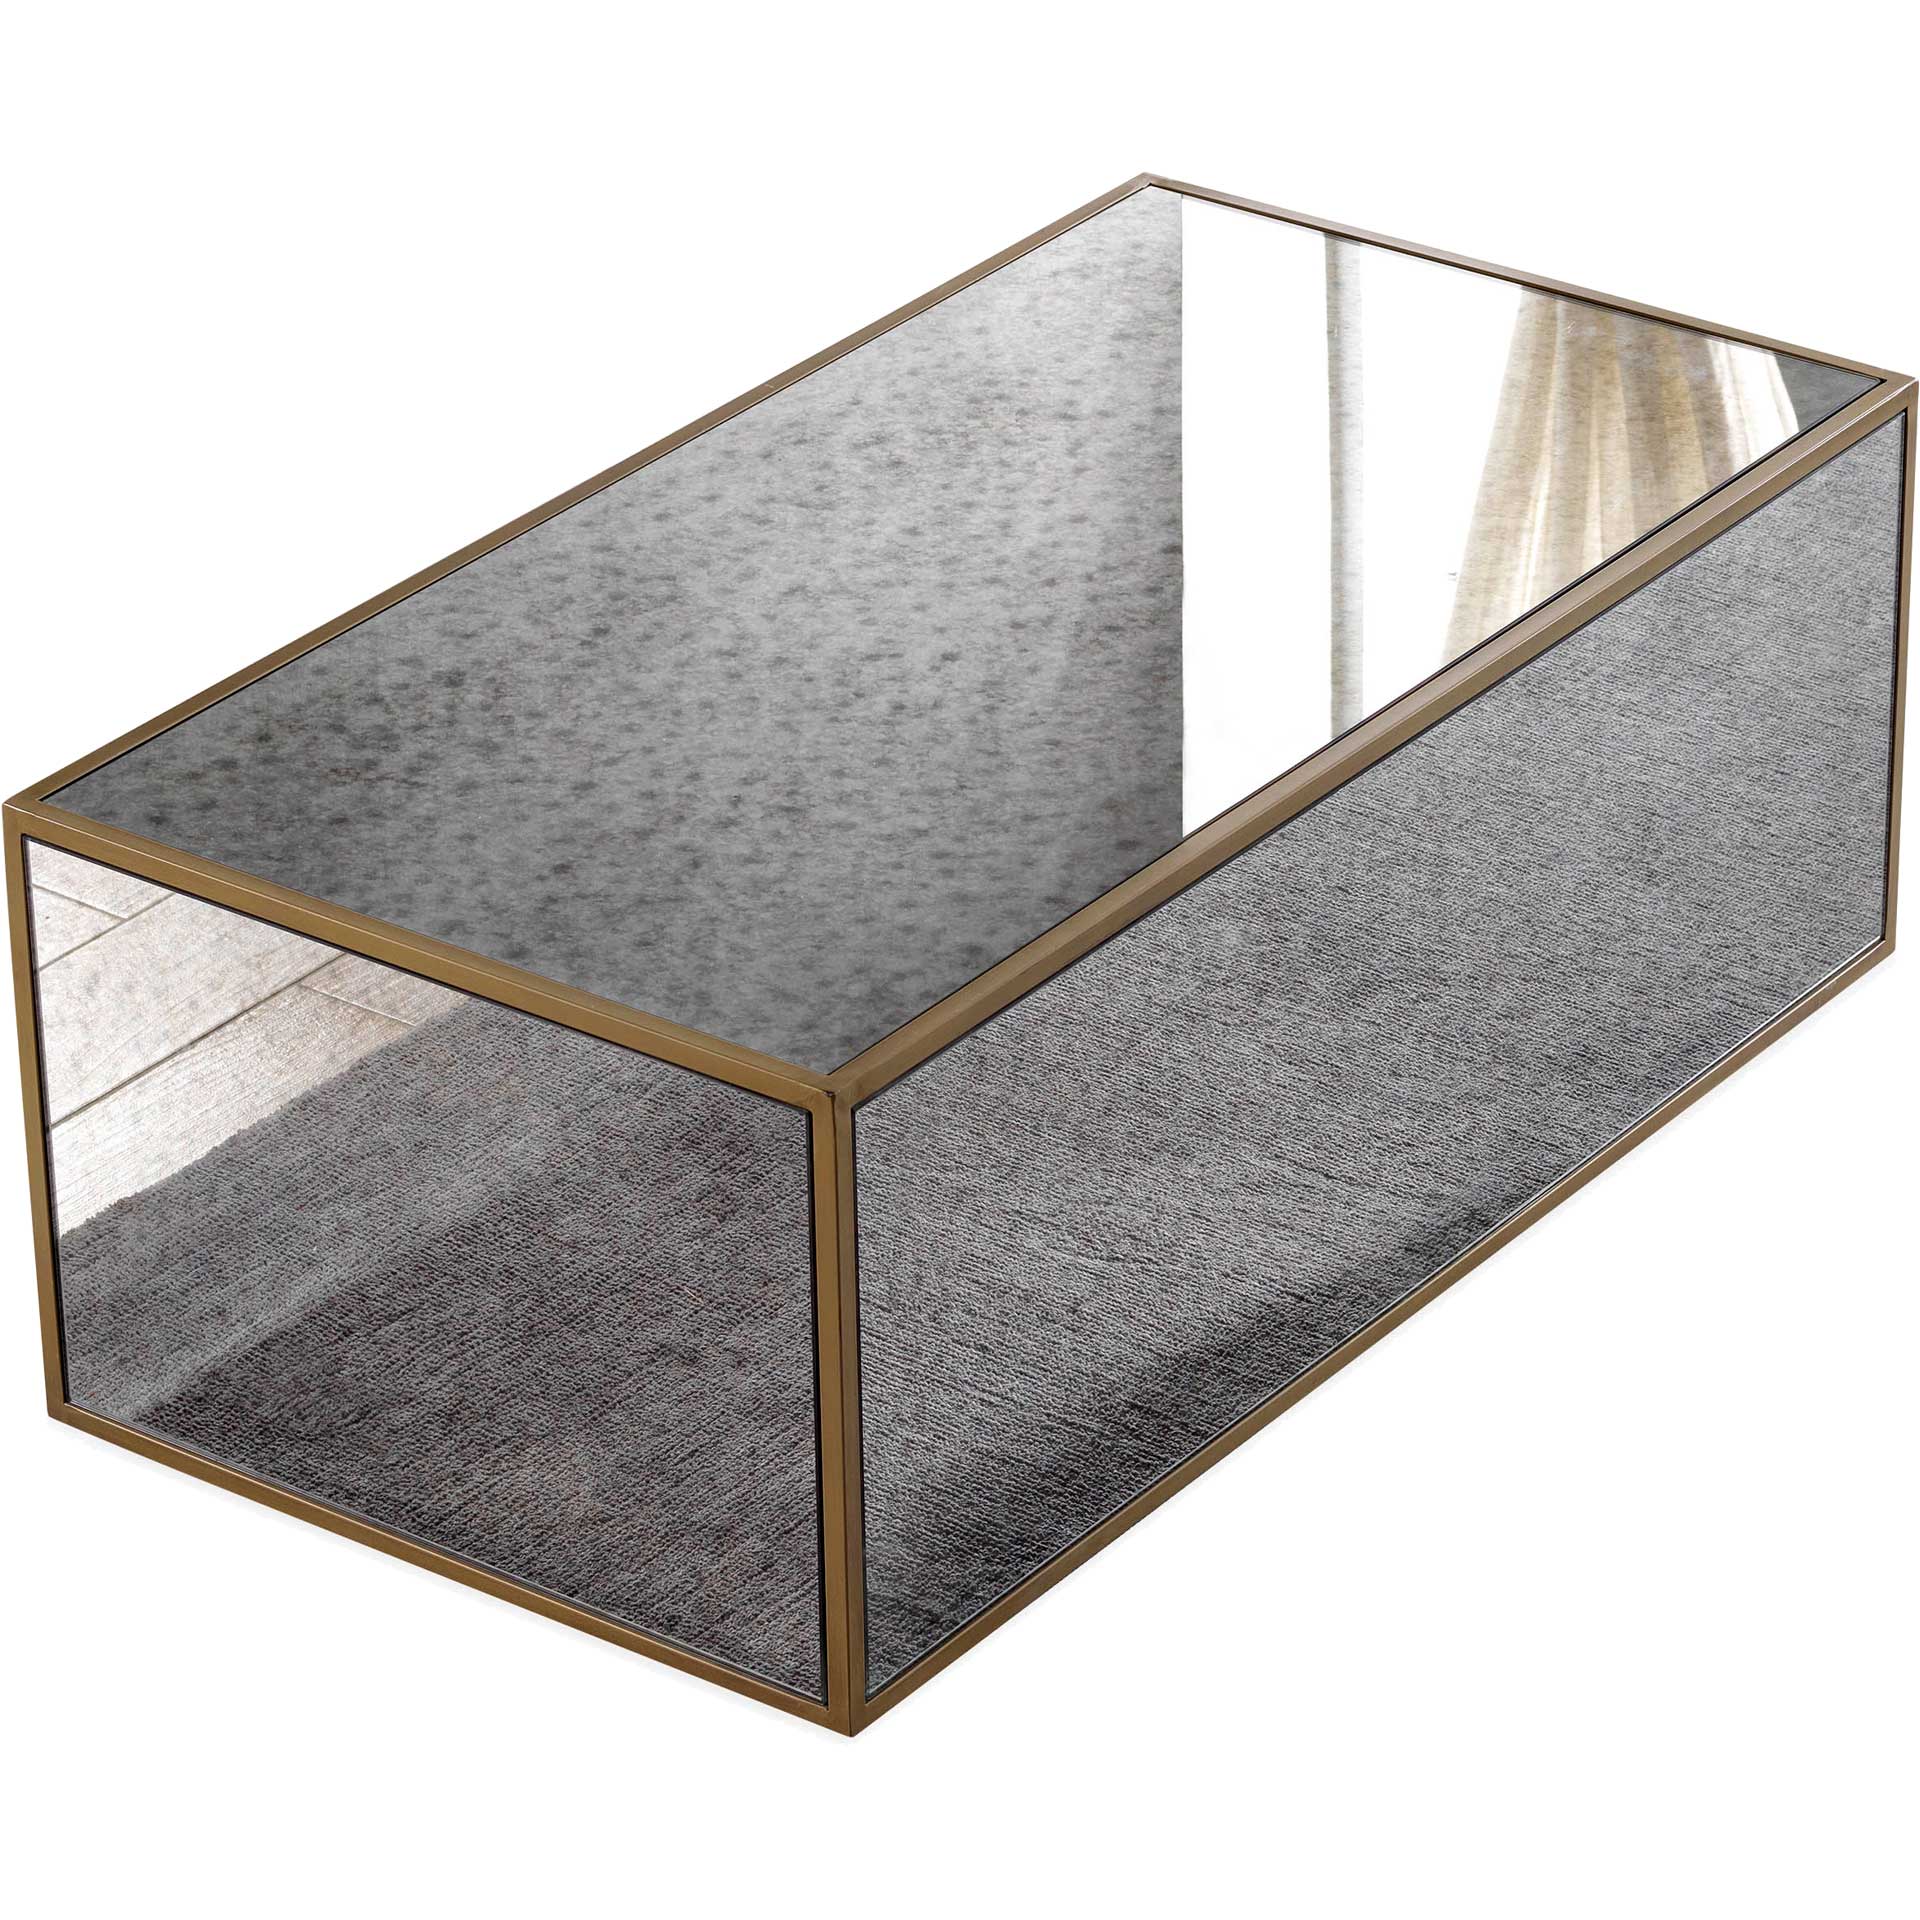 Lacey Mirrored Coffee Table Antique Mirror